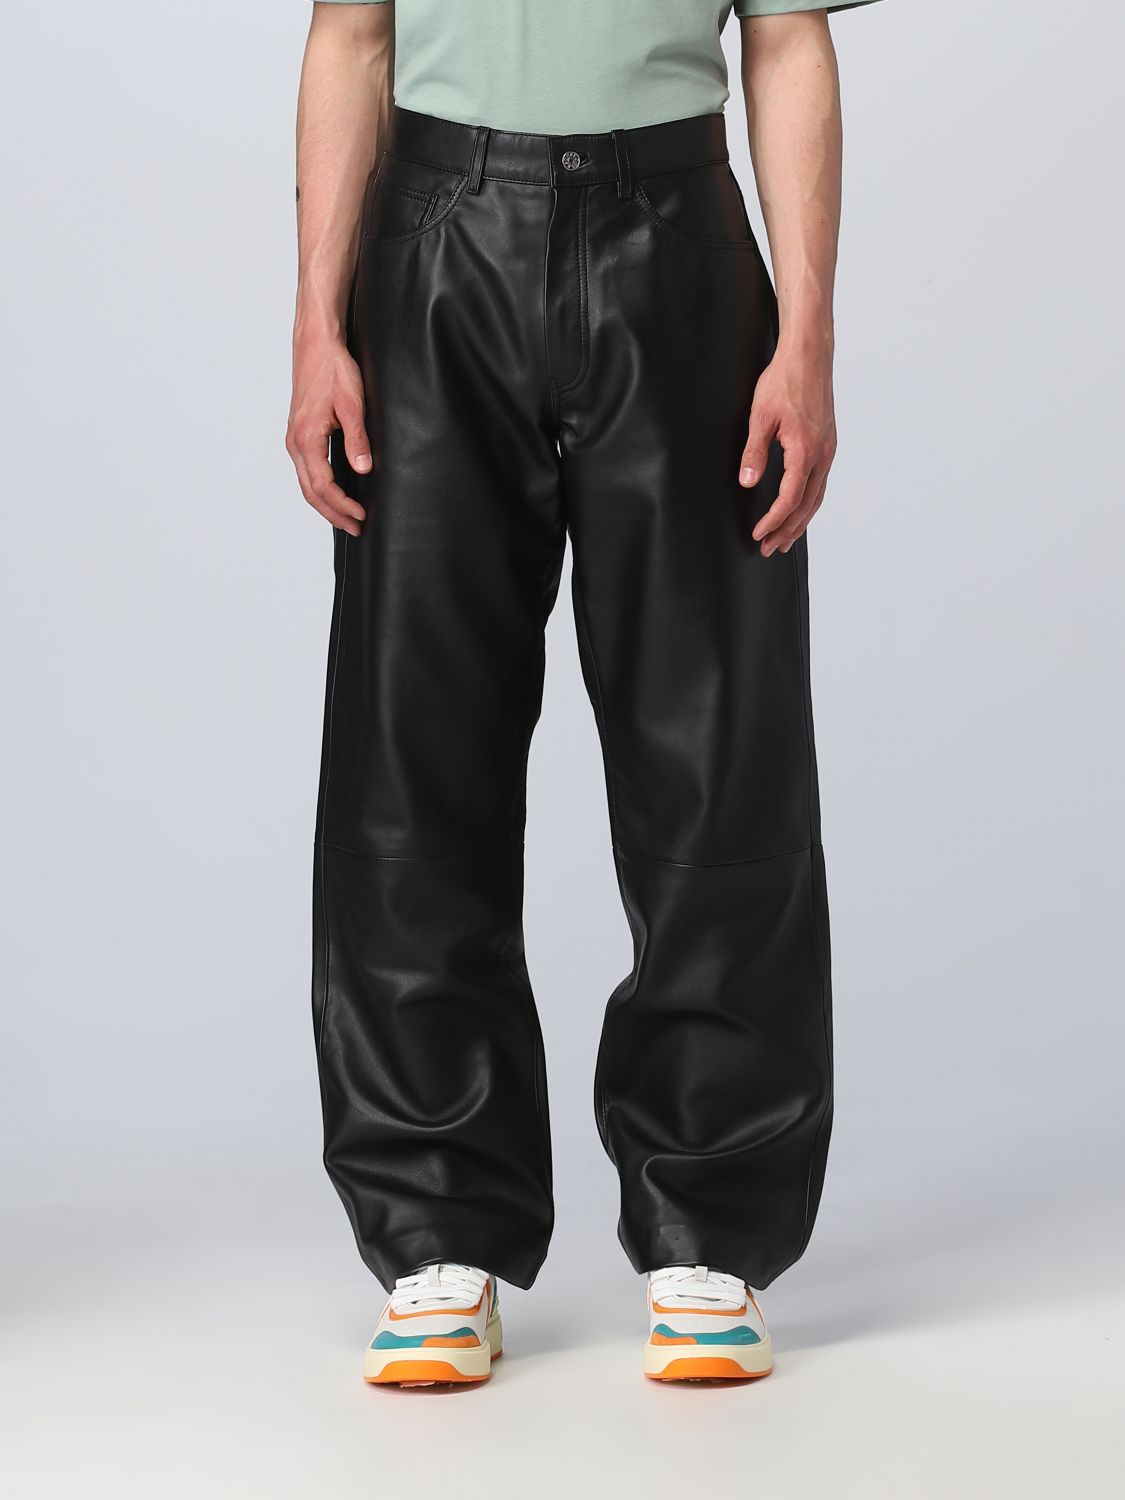 Fashionable during and beyond Christmas: Men’s Leather Pants as a Versatile and Timeless Gift插图